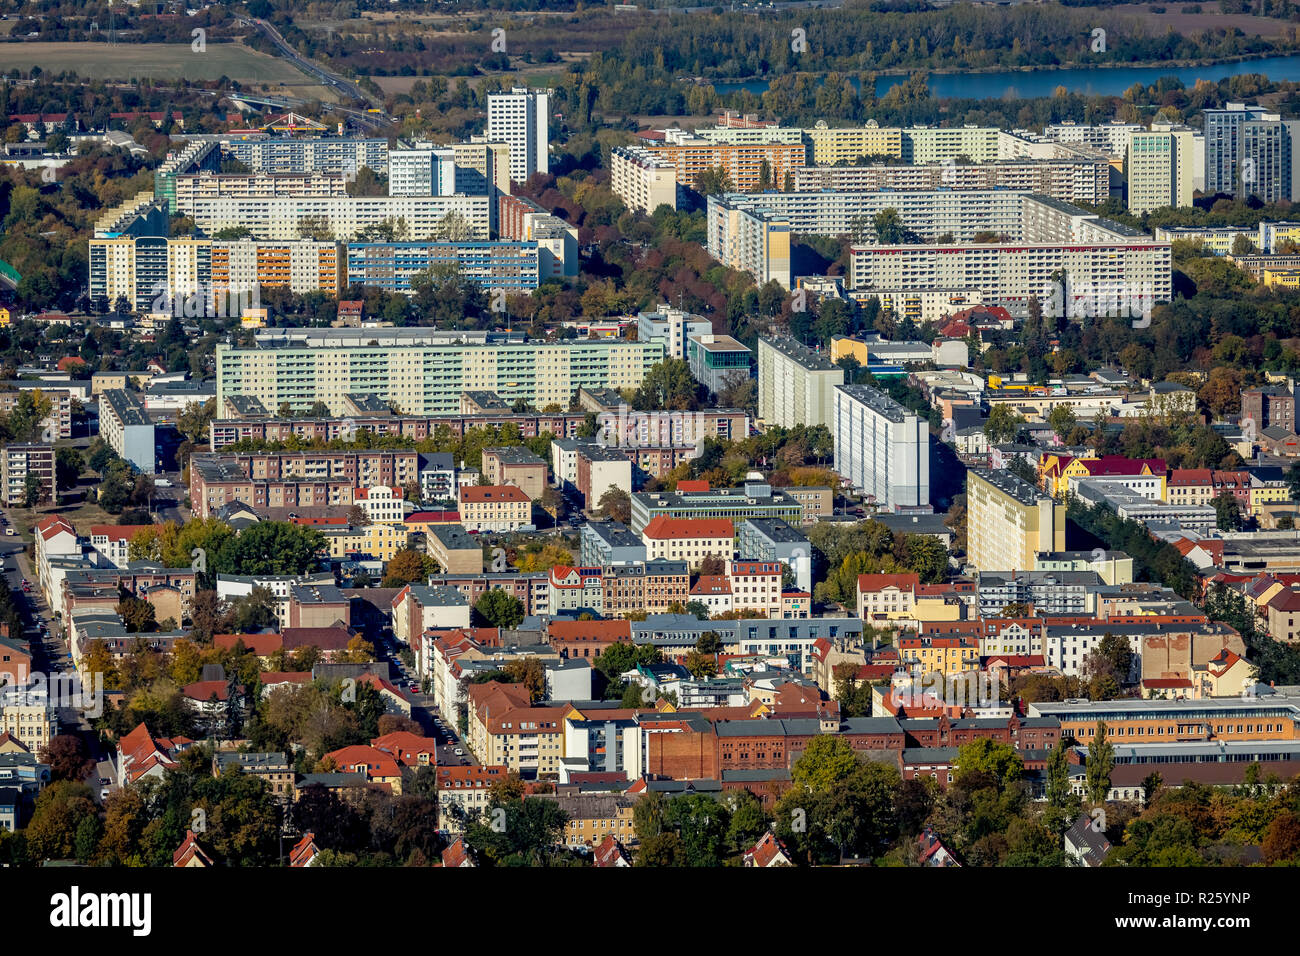 Aerial view, housing estate with skyscrapers, Neu Olvenstedt, Magdeburg, Saxony-Anhalt, Germany Stock Photo